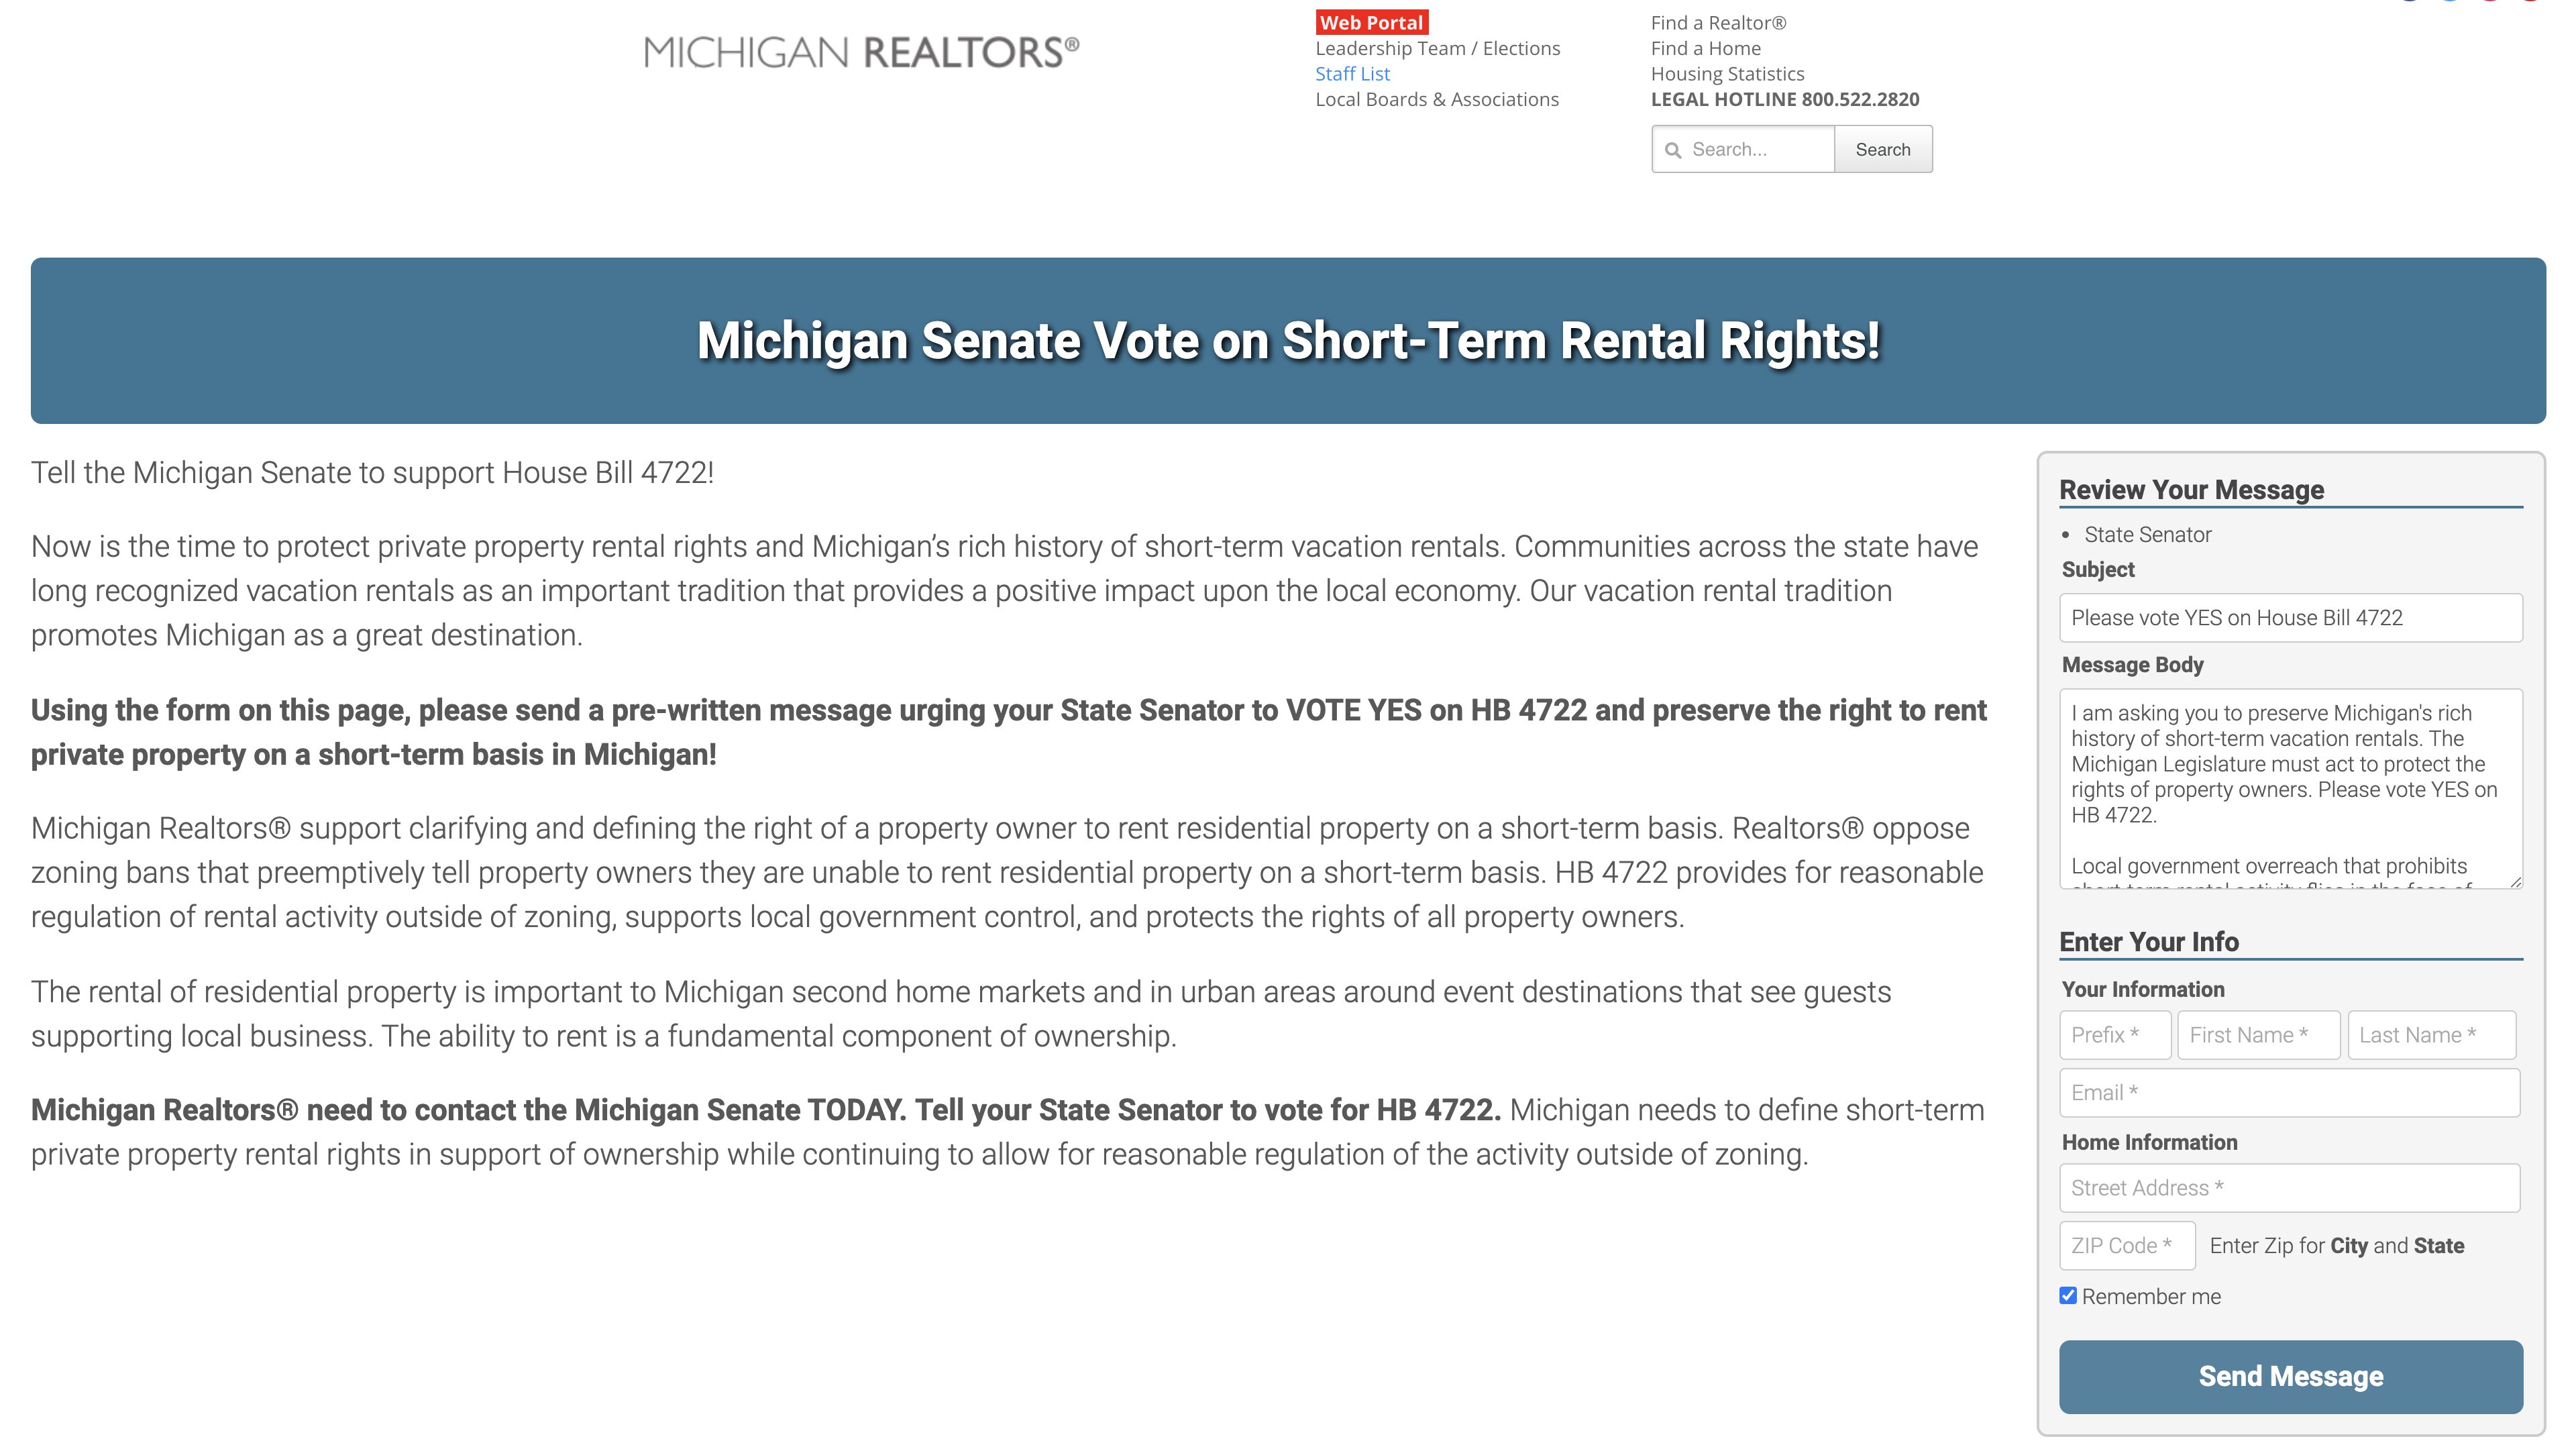 MI REALTORS Call for Action | Support Short-Term Rental Rights feature image